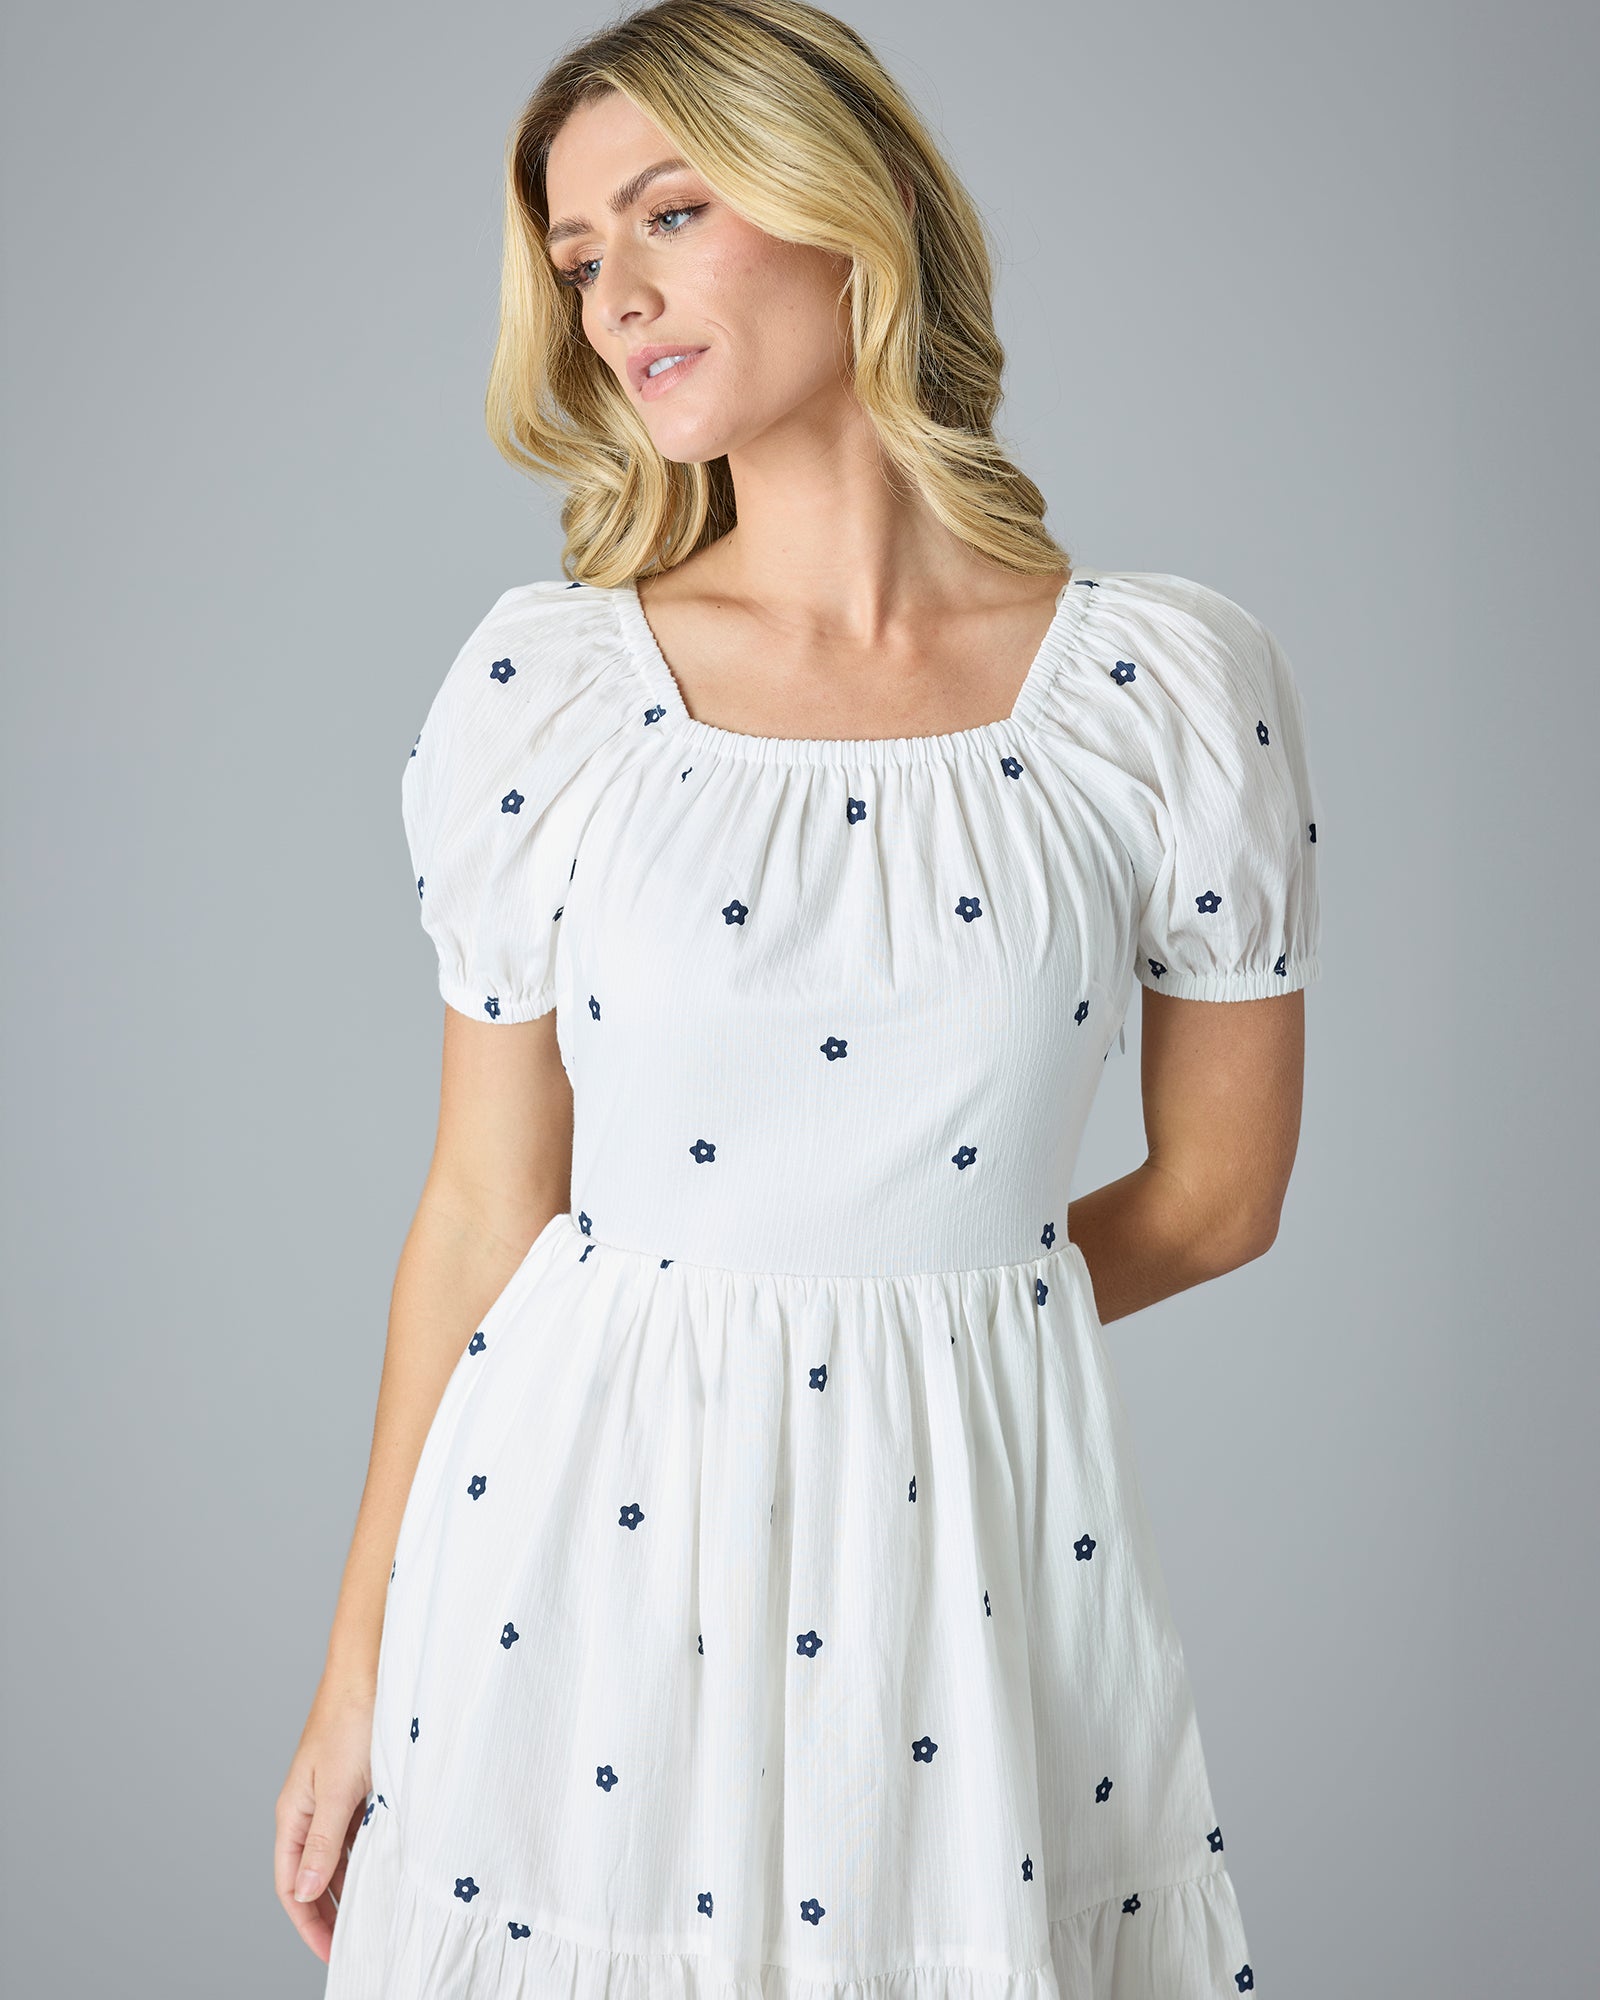 Woman in a white with blue flower dress that is knee-length and short sleeves